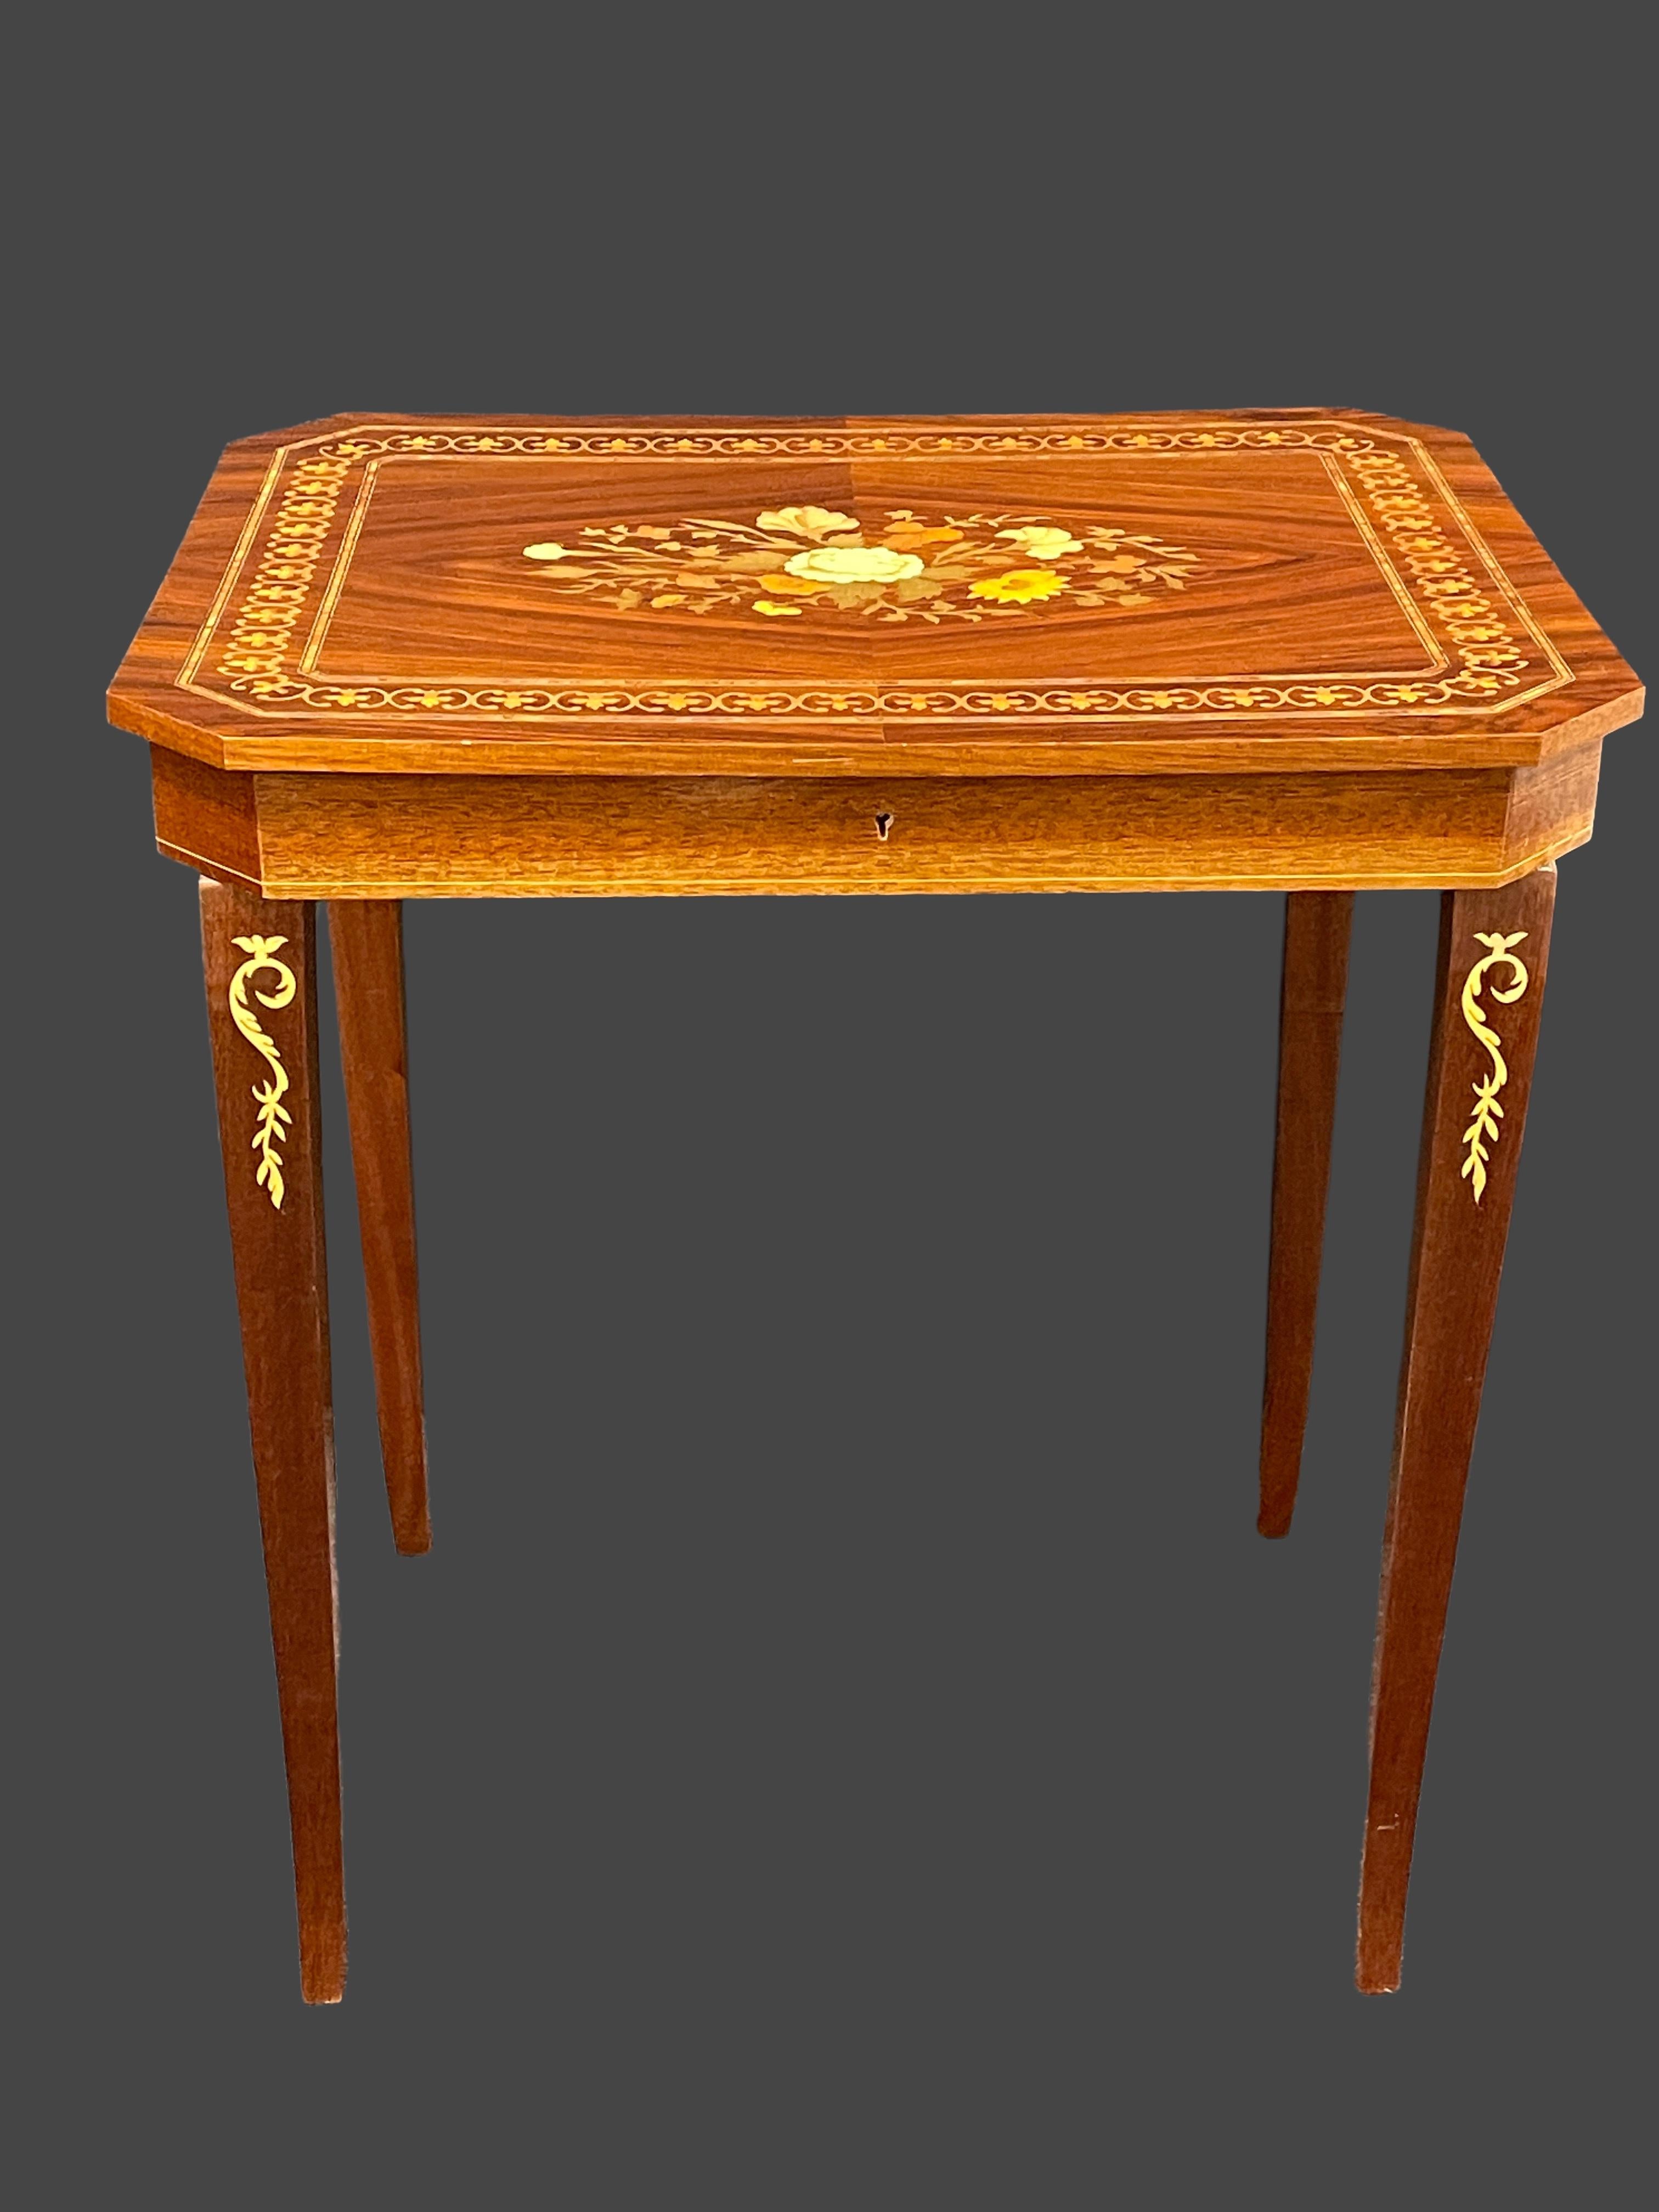 Beautiful Italian 20th century small rectangular wood side or end table with decorative inlaid top, cabriolet legs, private jewelry compartment and music box. It is approx. 2.63